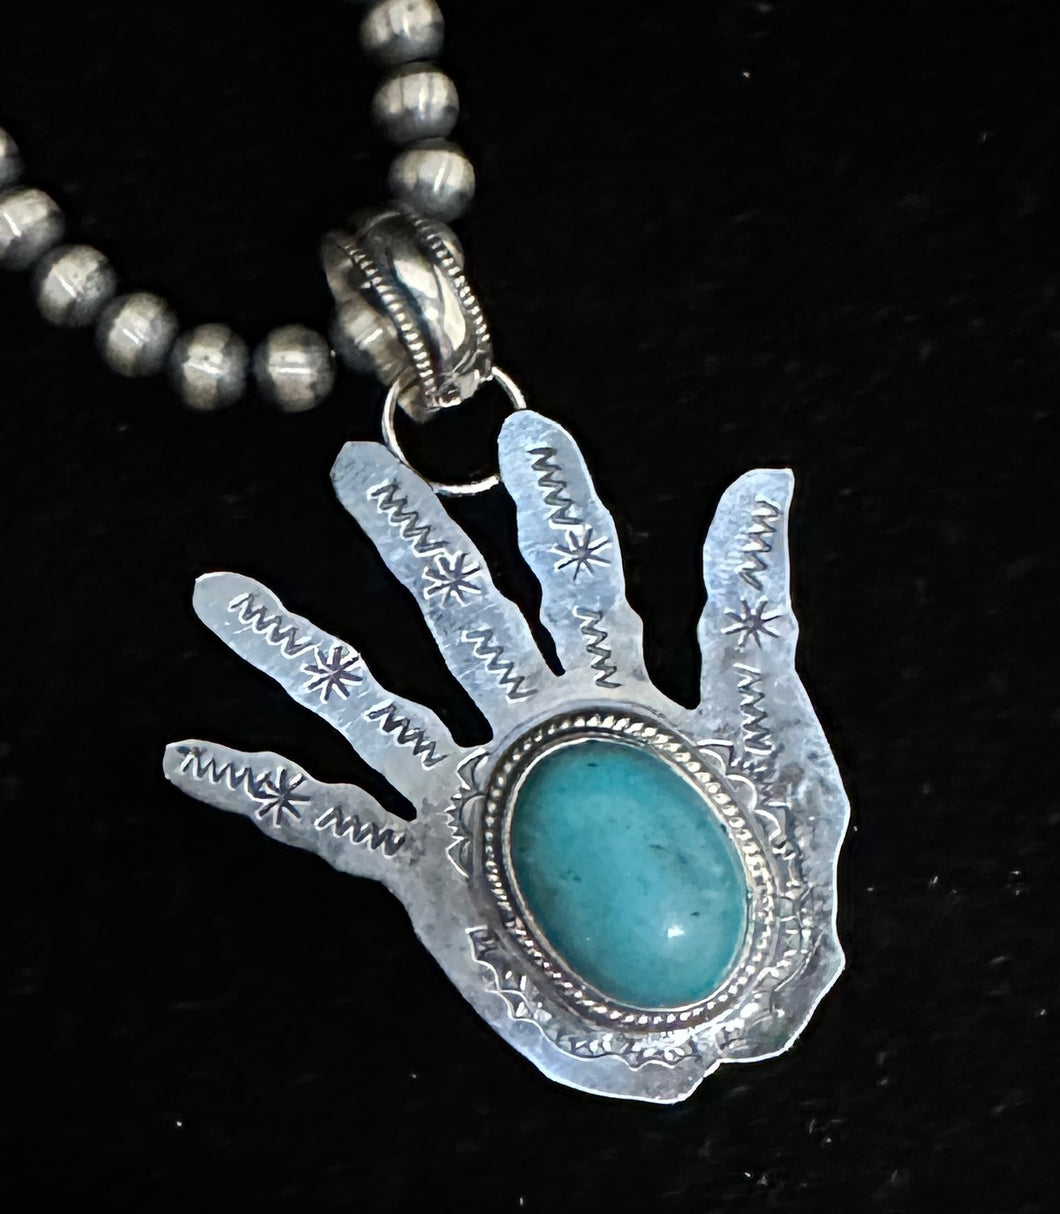 Turquoise Sterling Silver Hand Necklace Pendant